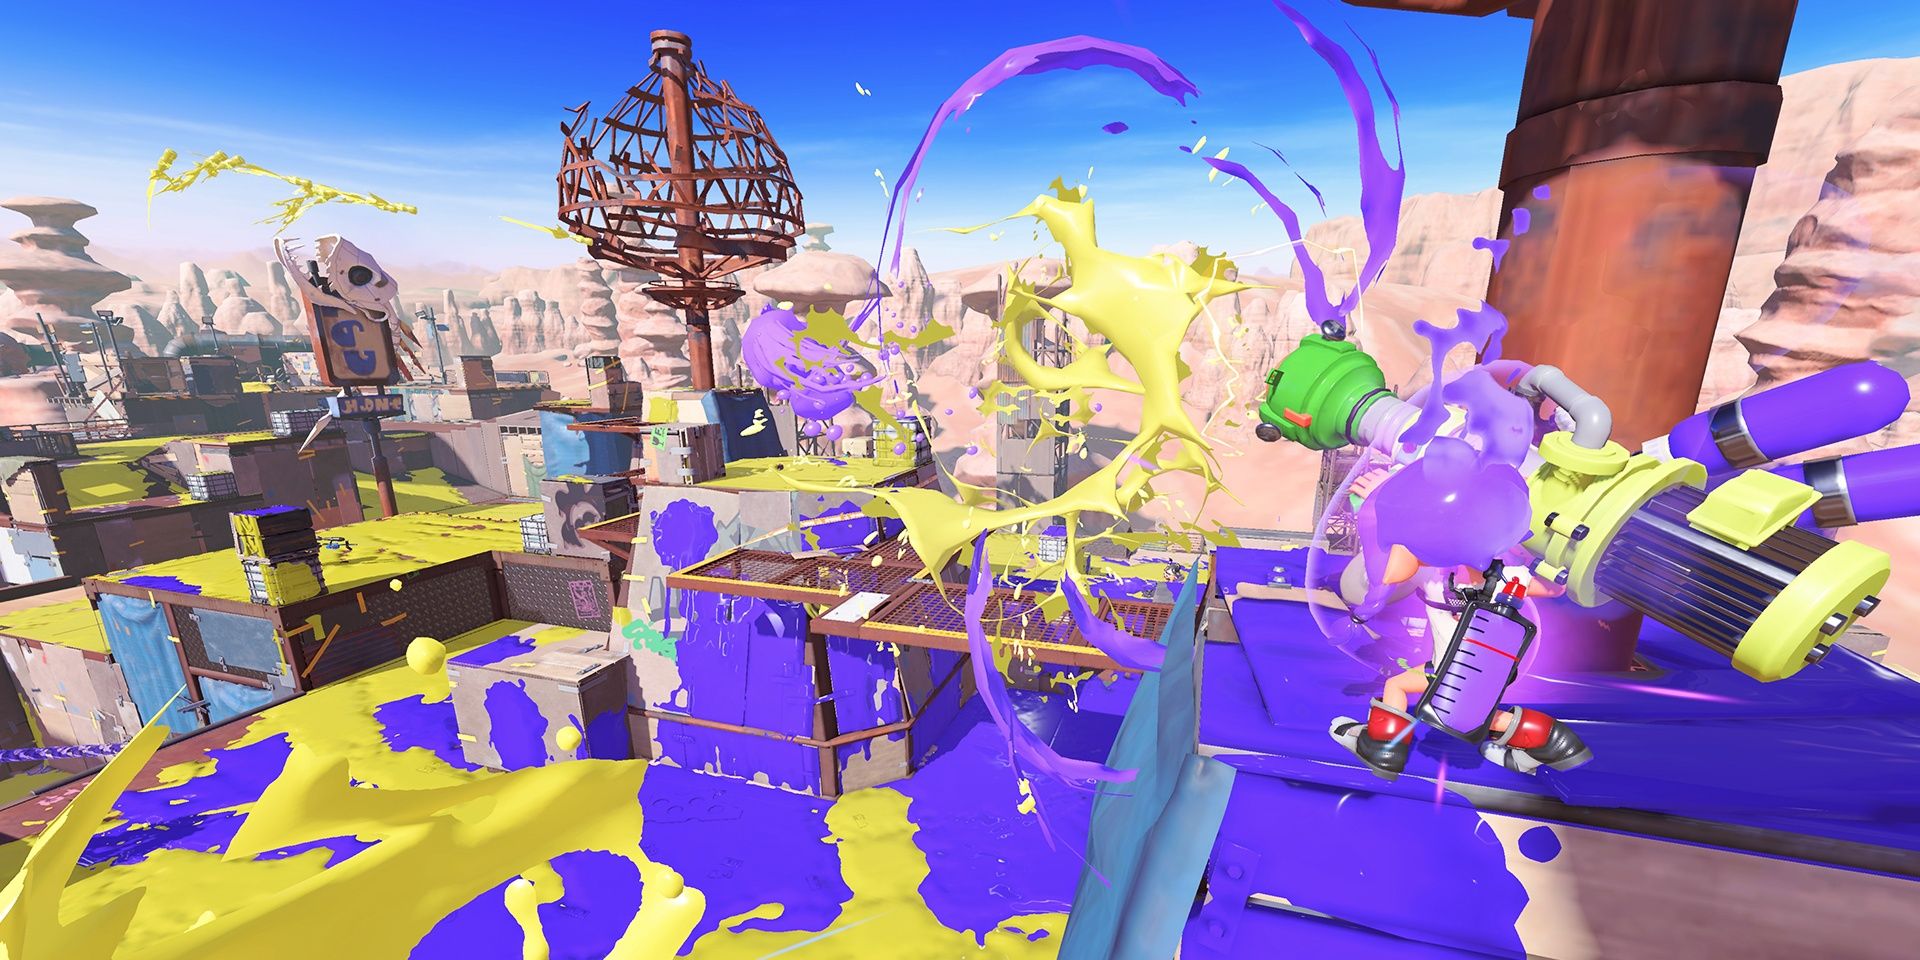 image from the game Splatoon 3 showing characters battling in an ink covered arena